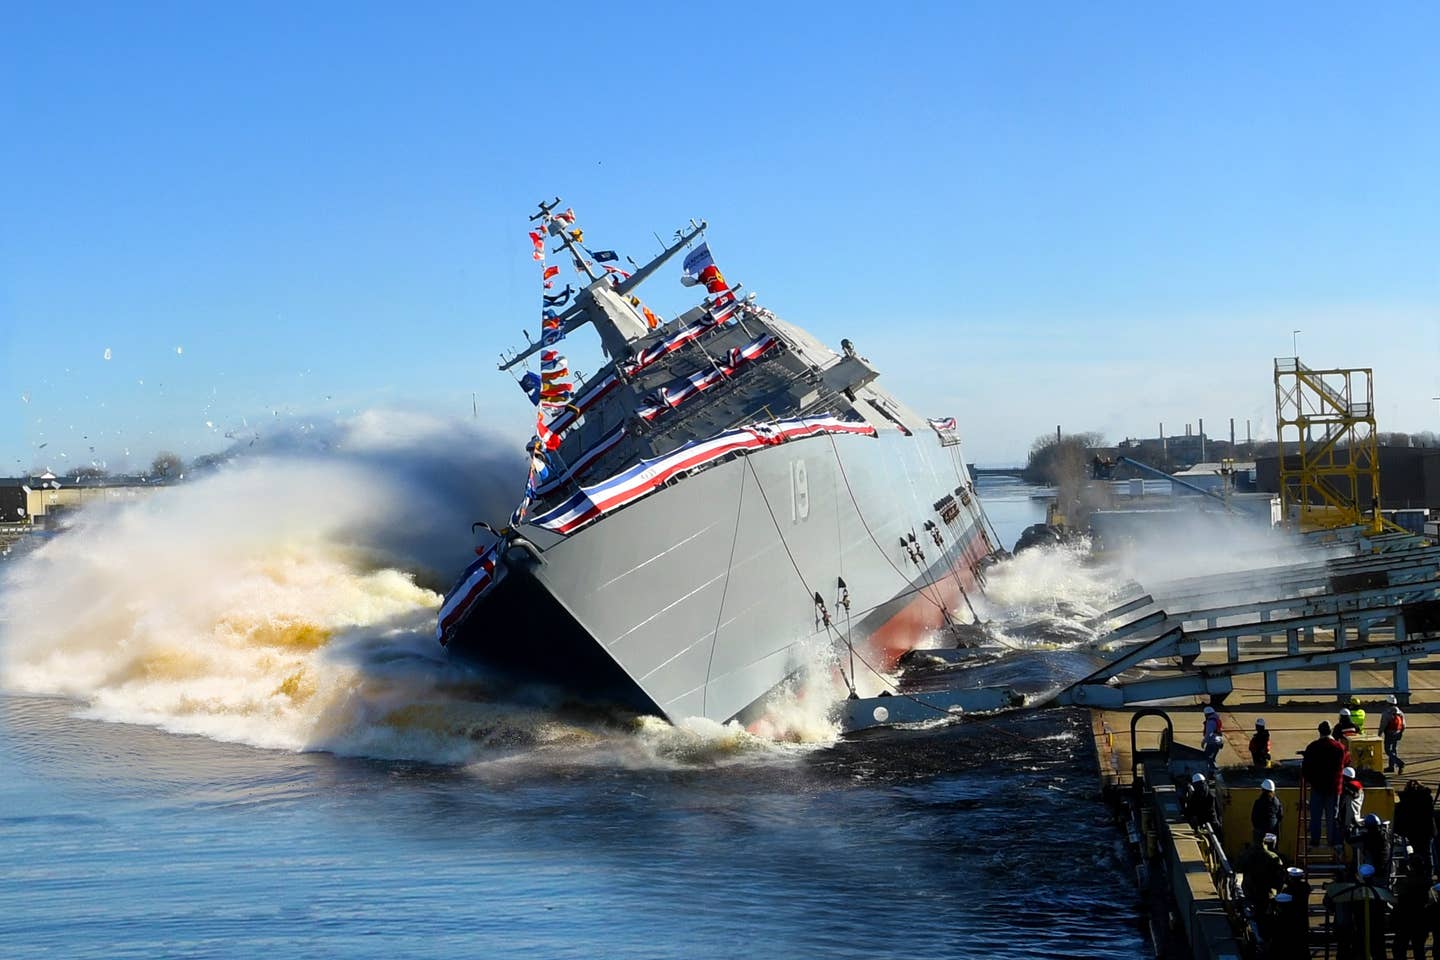 Littoral combat ship USS St. <em>Louis</em> (LCS 19) launches sideways into the Menominee River in Marinette, Wisconsin, following its christening, December 15, 2018, by ship's sponsor Barbara Taylor. <em>U.S. Navy photo</em>